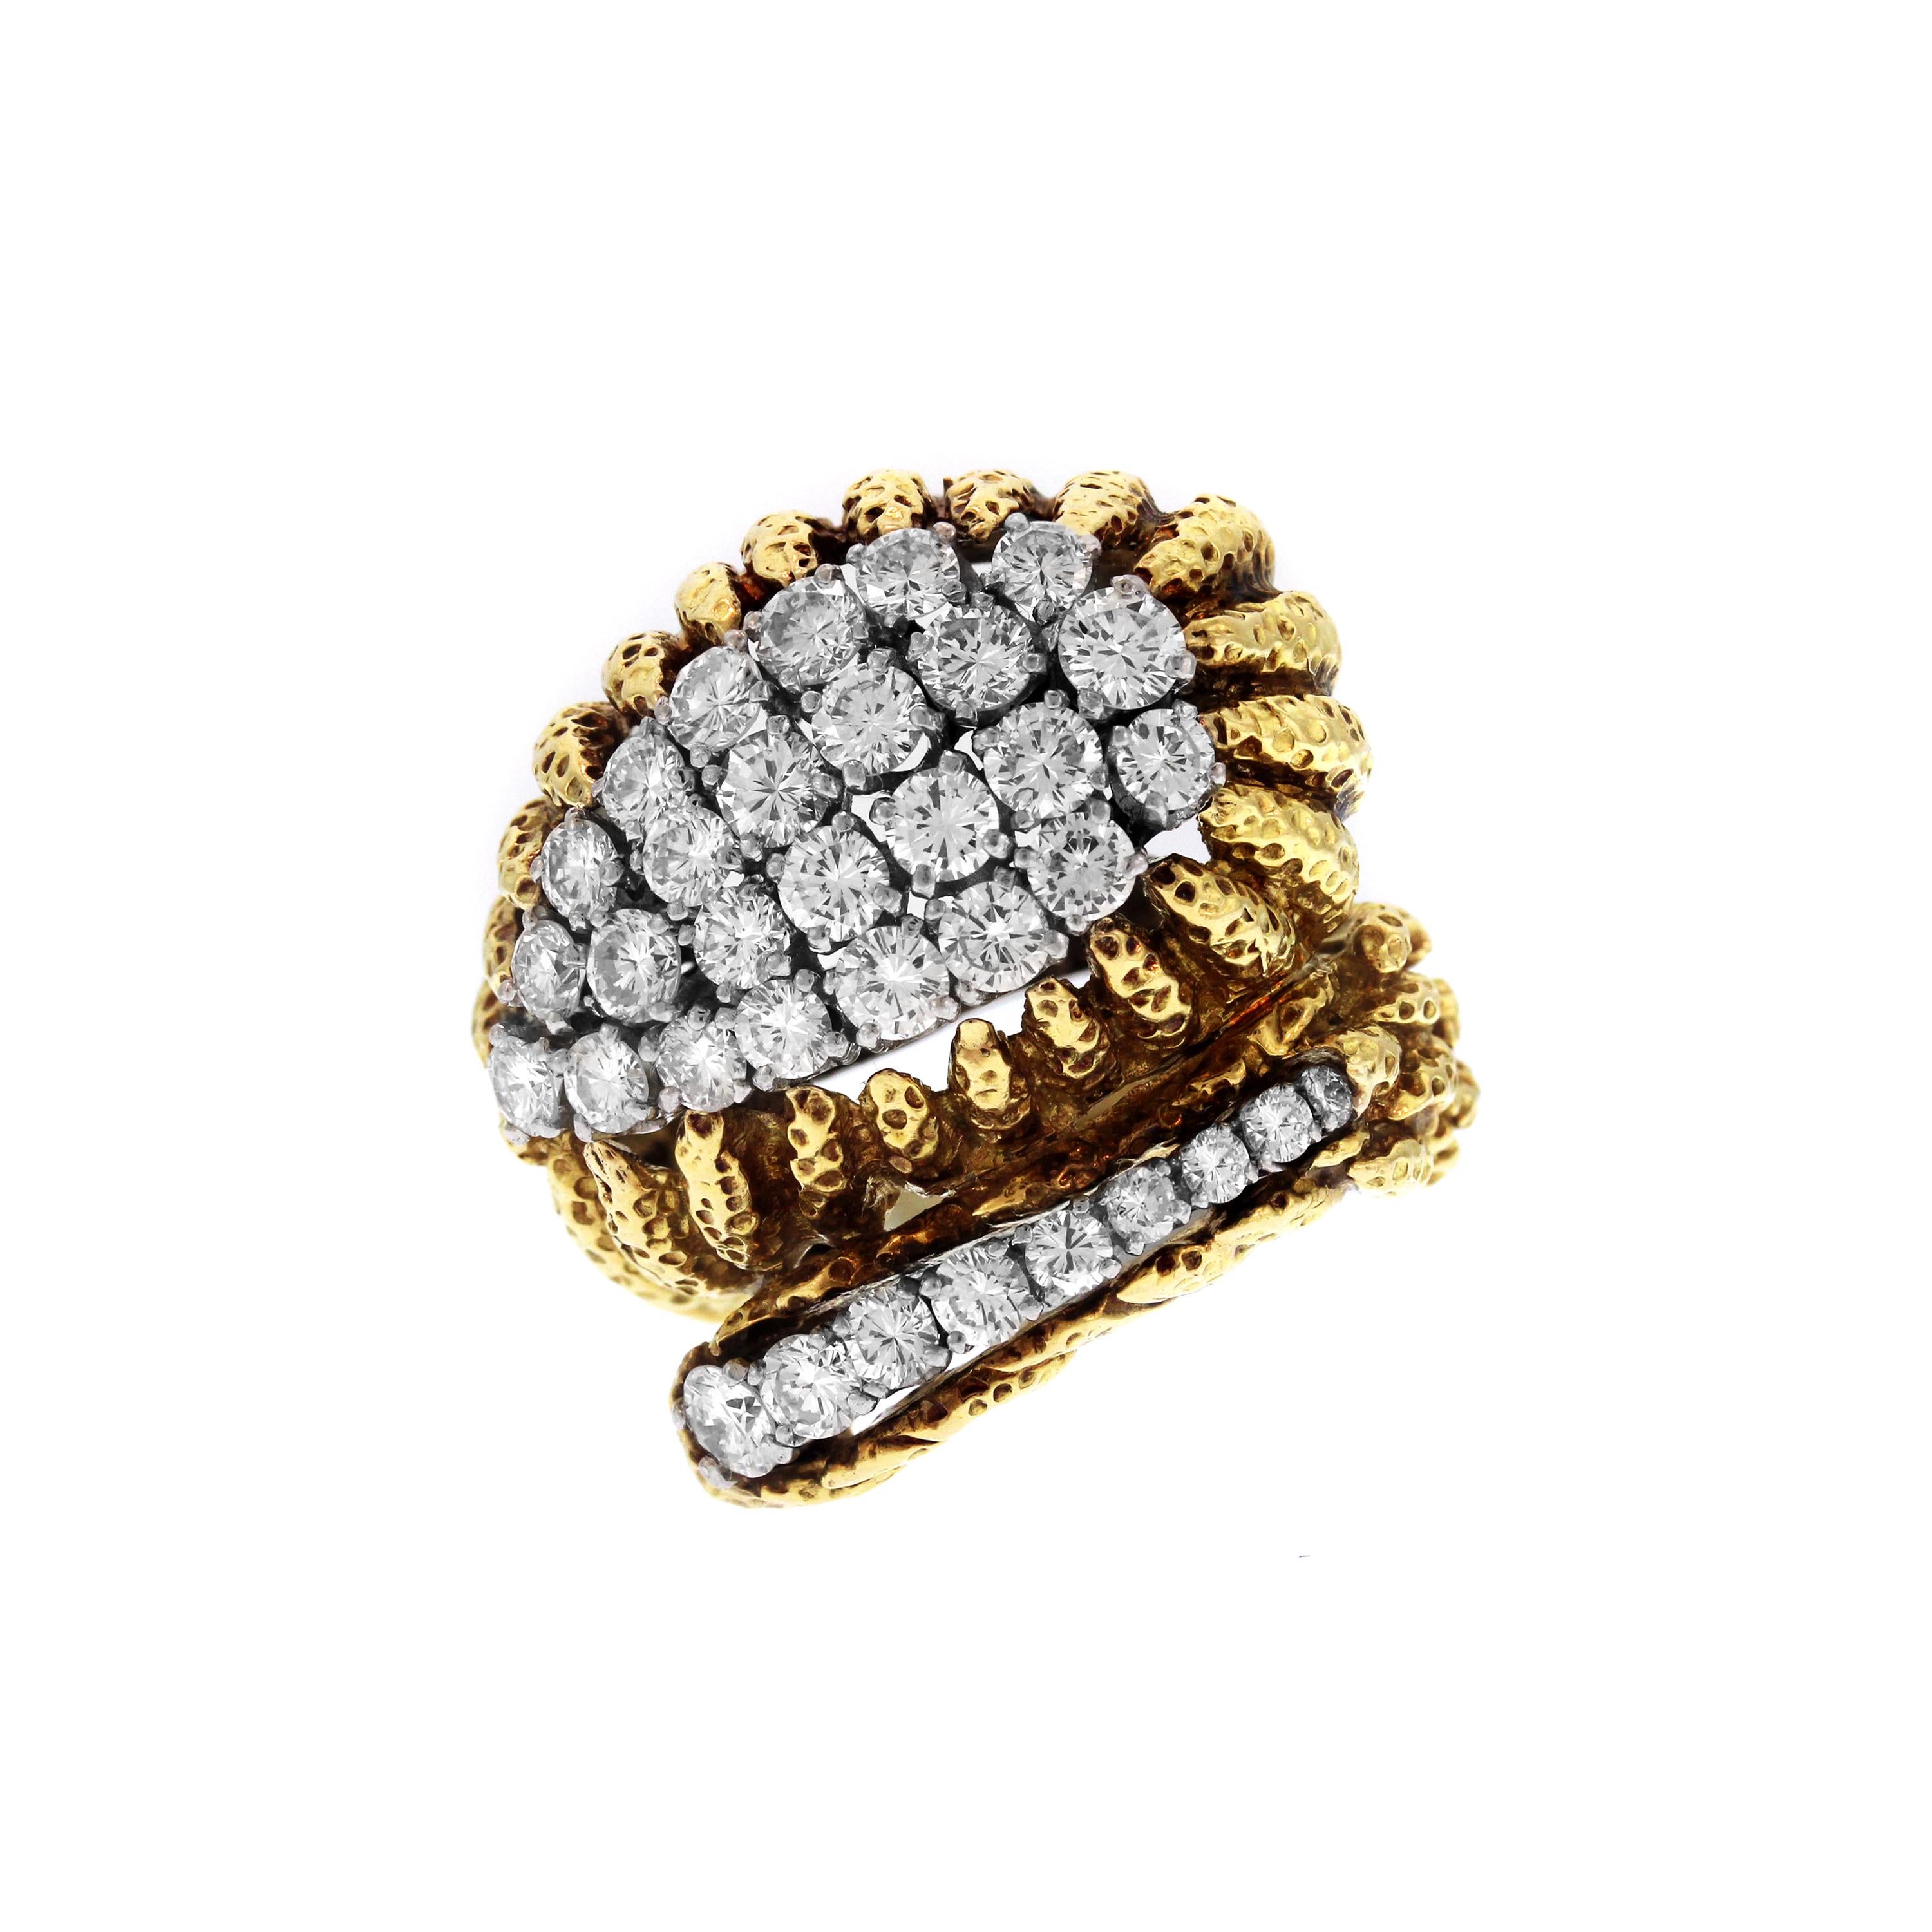 IF YOU ARE REALLY INTERESTED, CONTACT US WITH ANY REASONABLE OFFER. WE WILL TRY OUR BEST TO MAKE YOU HAPPY!

18K Yellow Gold and Platinum Ring with Diamonds by David Webb

This stunning ring comes with the David Webb 